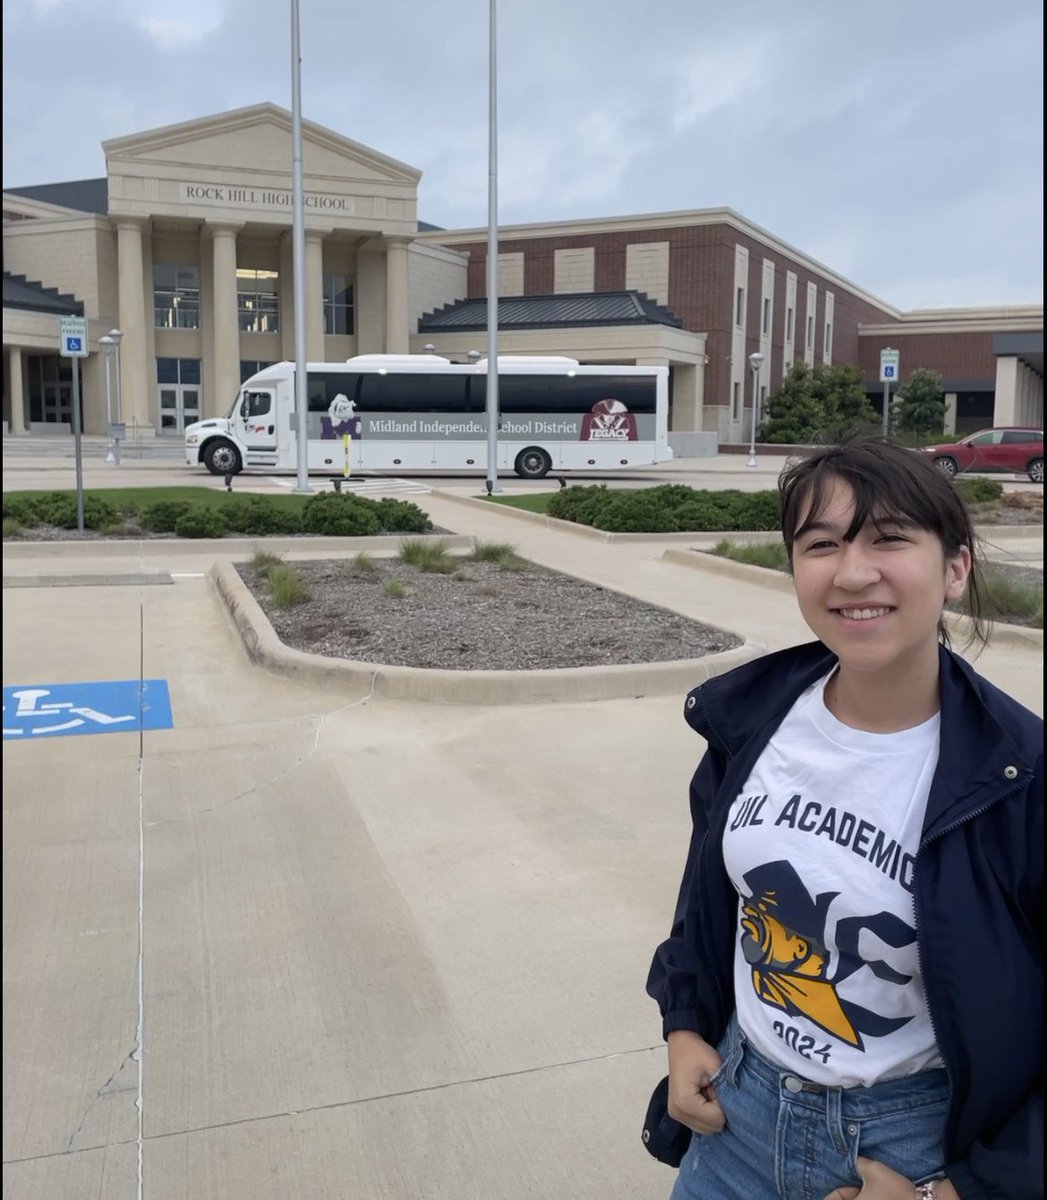 Ready to compete in @uiltexas Academics Regionals with 20 of her Eastwood HS teammates! 💙💛 Proud, proud, proud of this girl, the things she’s accomplished and the person she is inside and out! ❤️ #EastwoodLegacyContinues